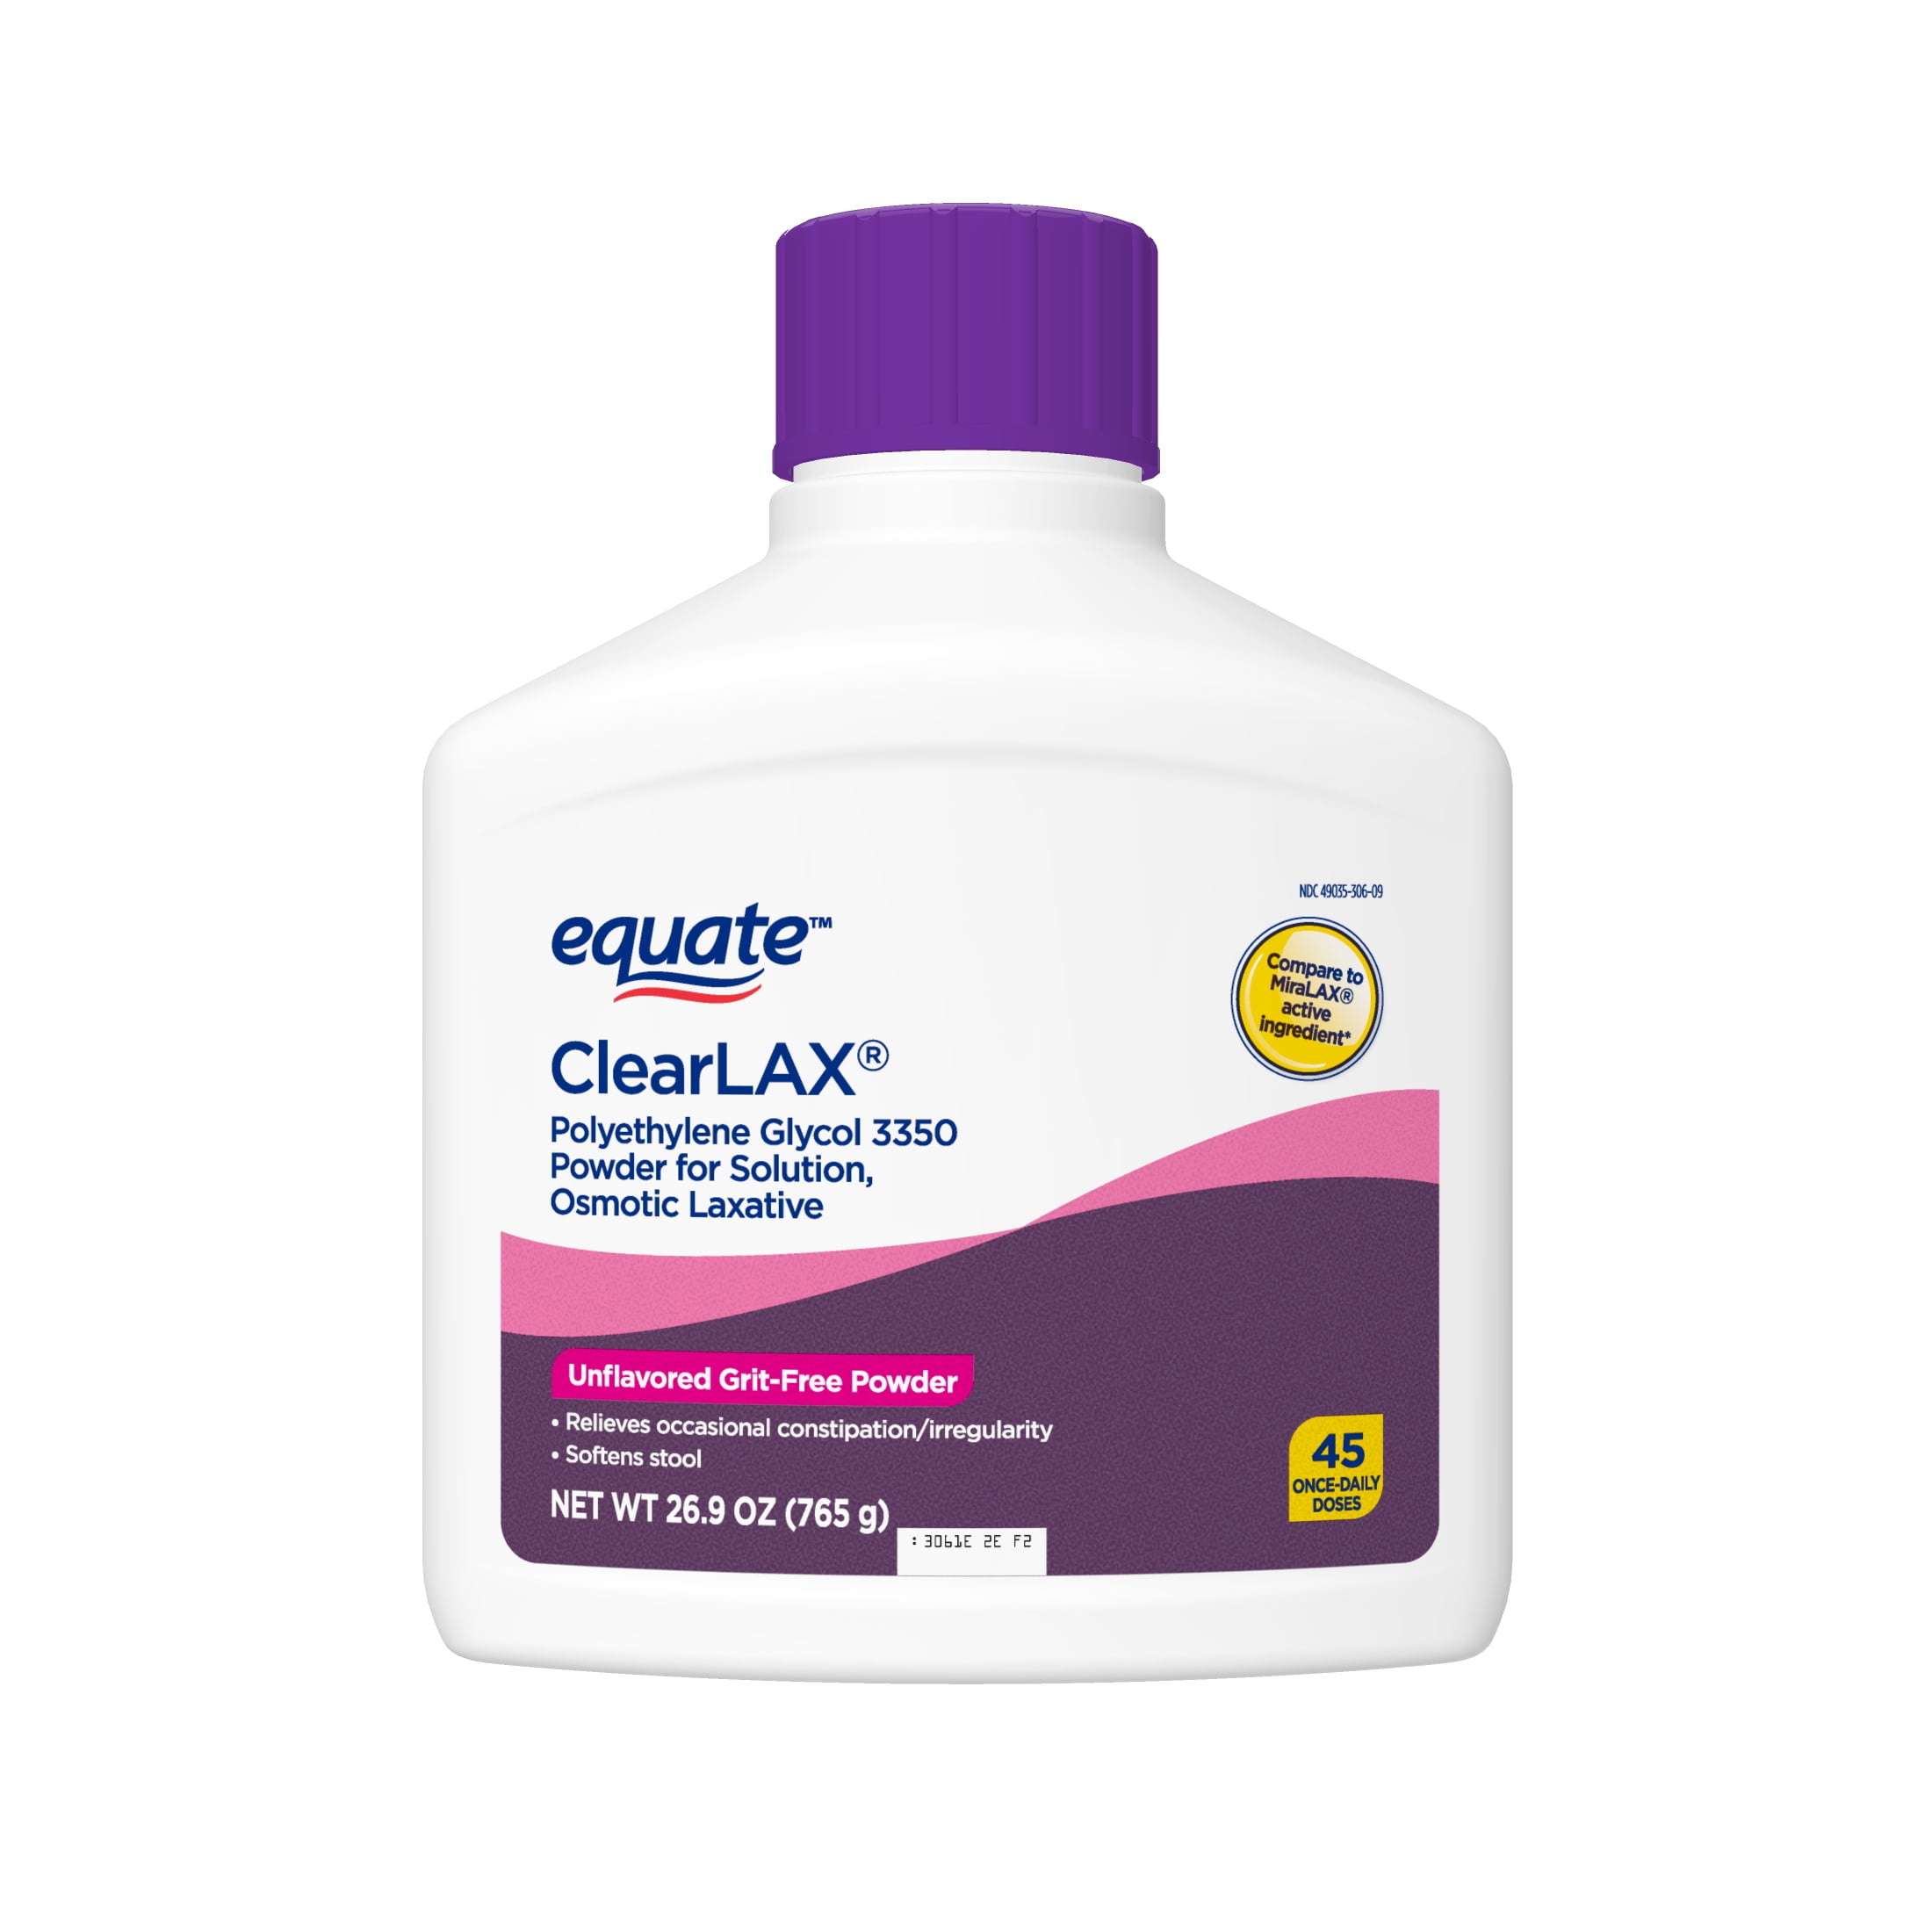 Equate Polyethylene Glycol 3350 Unflavored Powder for Solution, 45 Doses